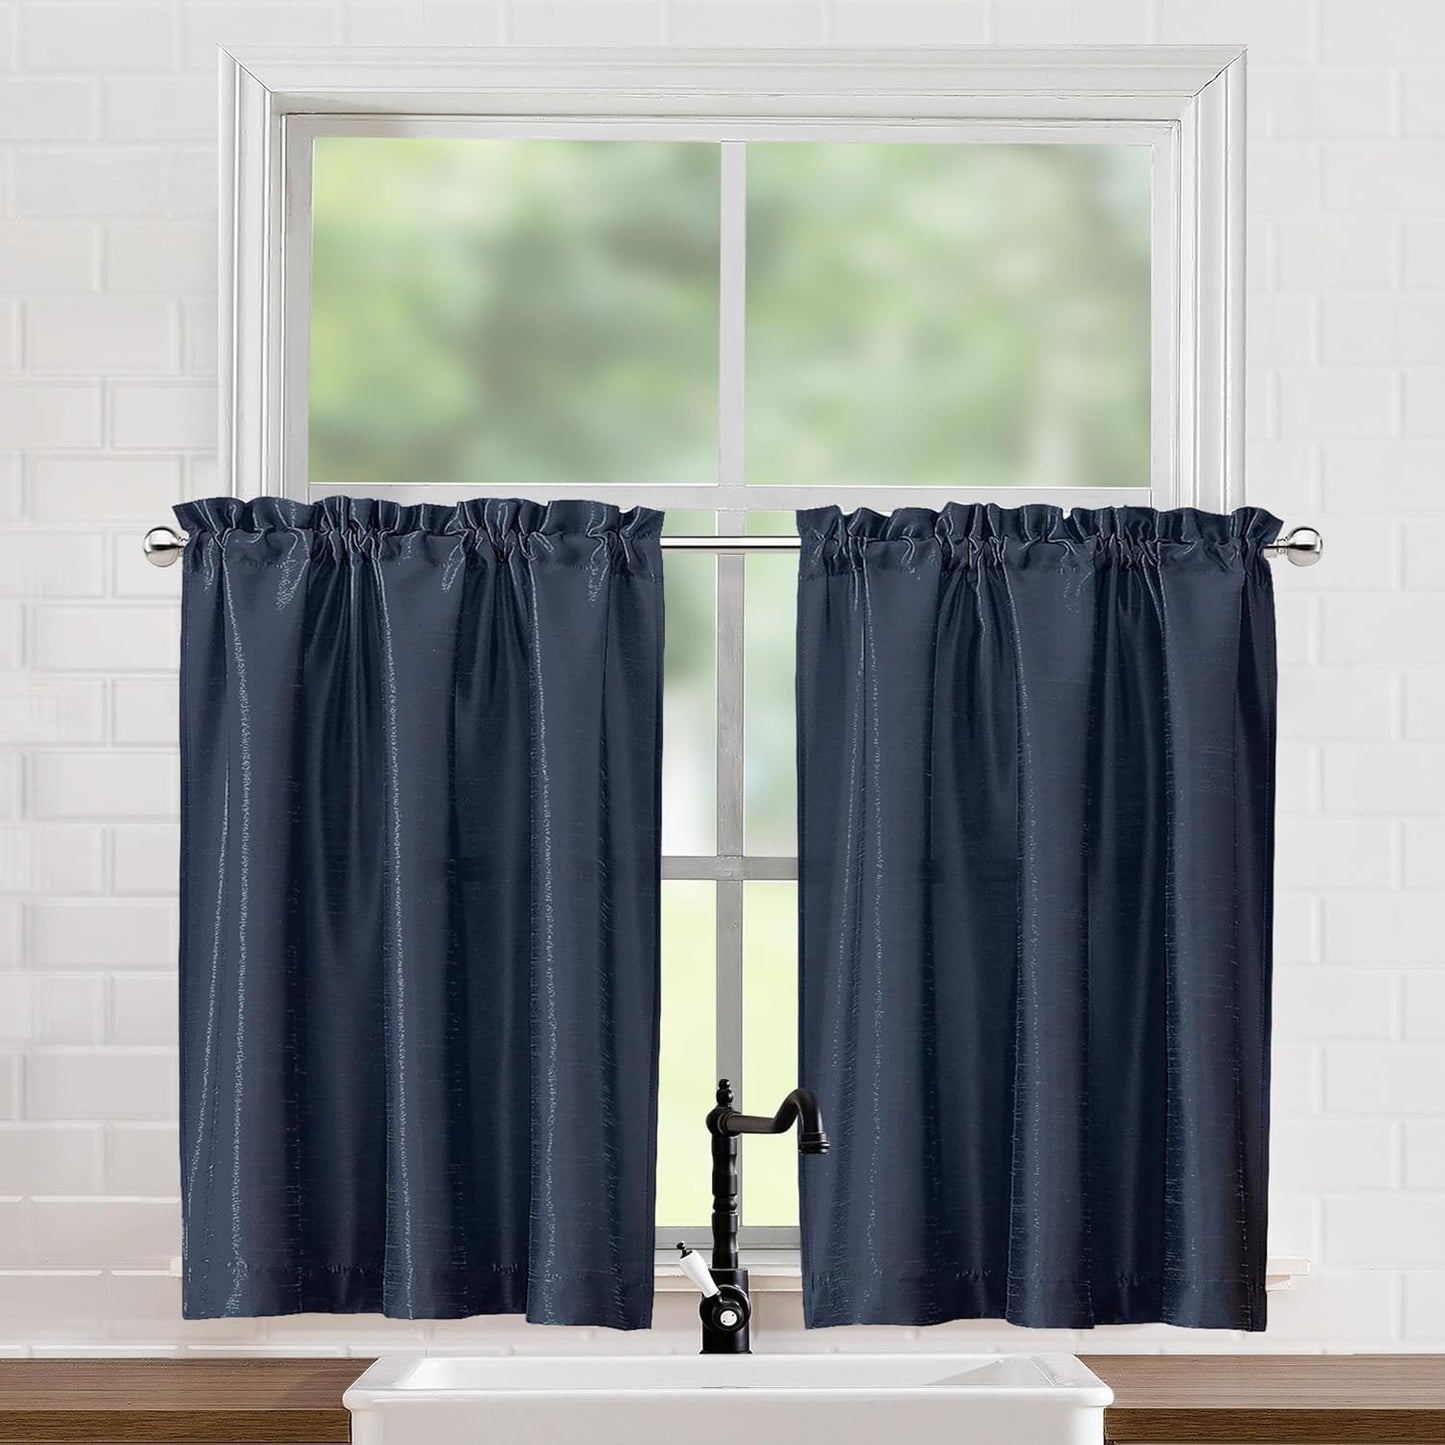 Chyhomenyc Uptown Sage Green Kitchen Curtains 45 Inch Length 2 Panels, Room Darkening Faux Silk Chic Fabric Short Window Curtains for Bedroom Living Room, Each 30Wx45L  Chyhomenyc Navy Blue 2X40"Wx36"L 